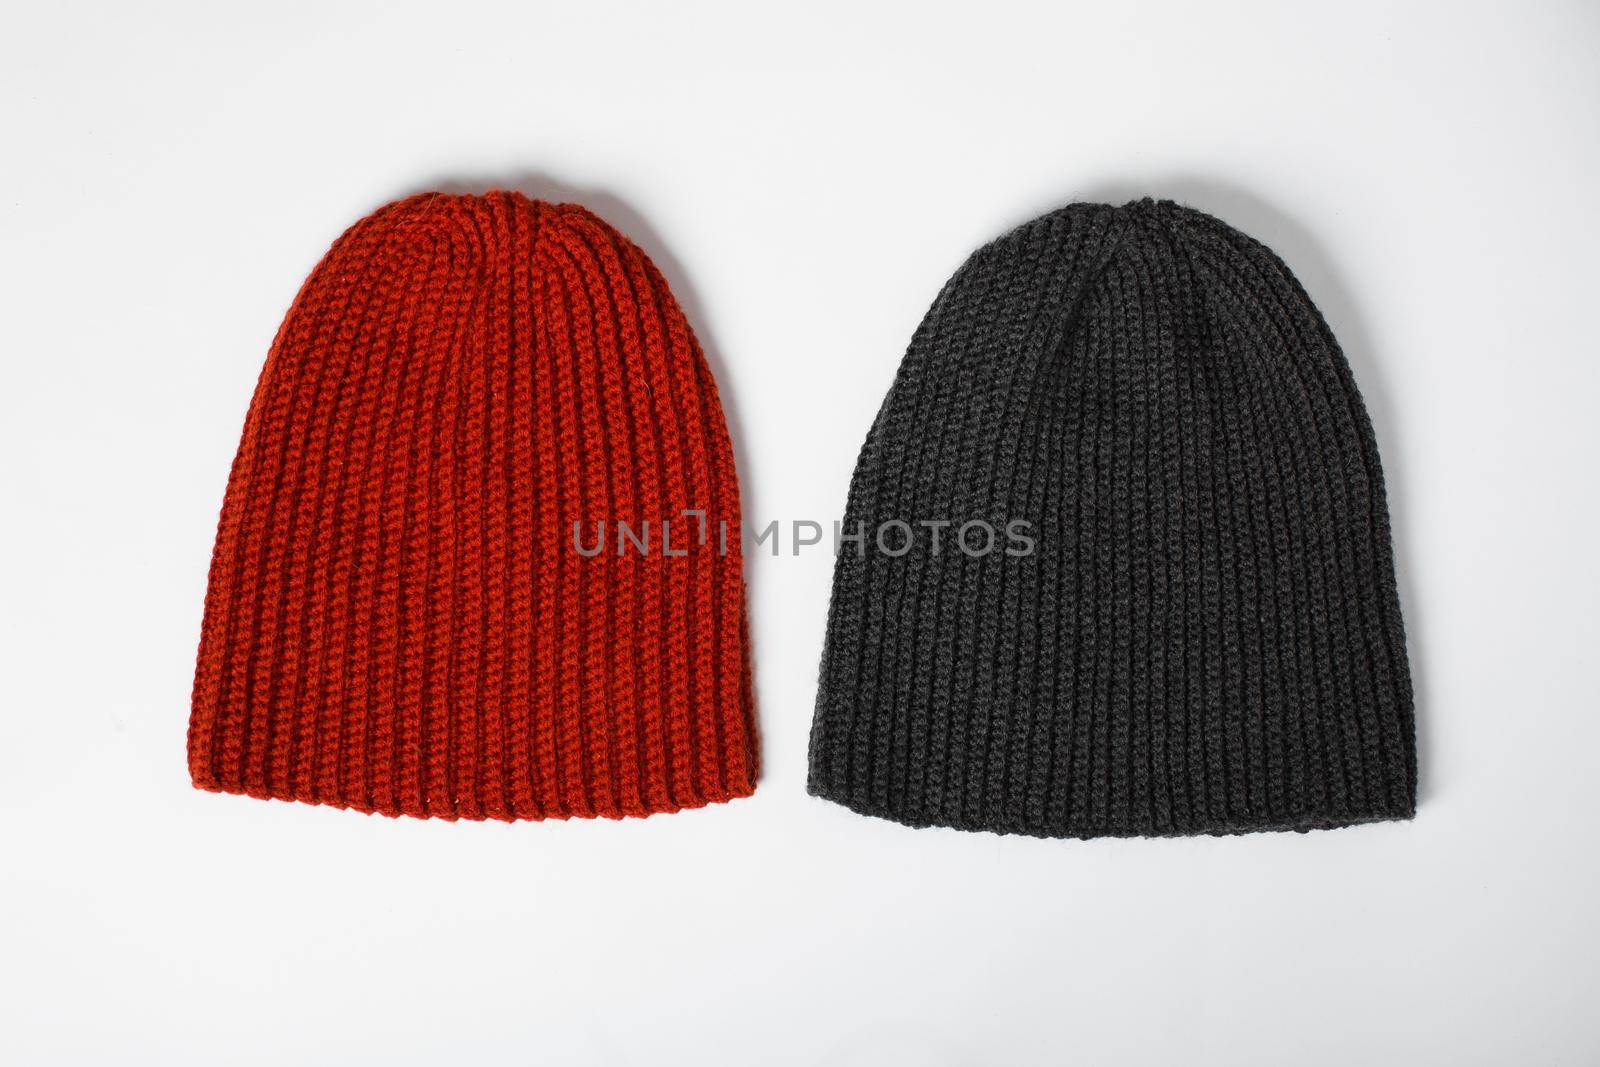 knitted hat in red and black on a white background